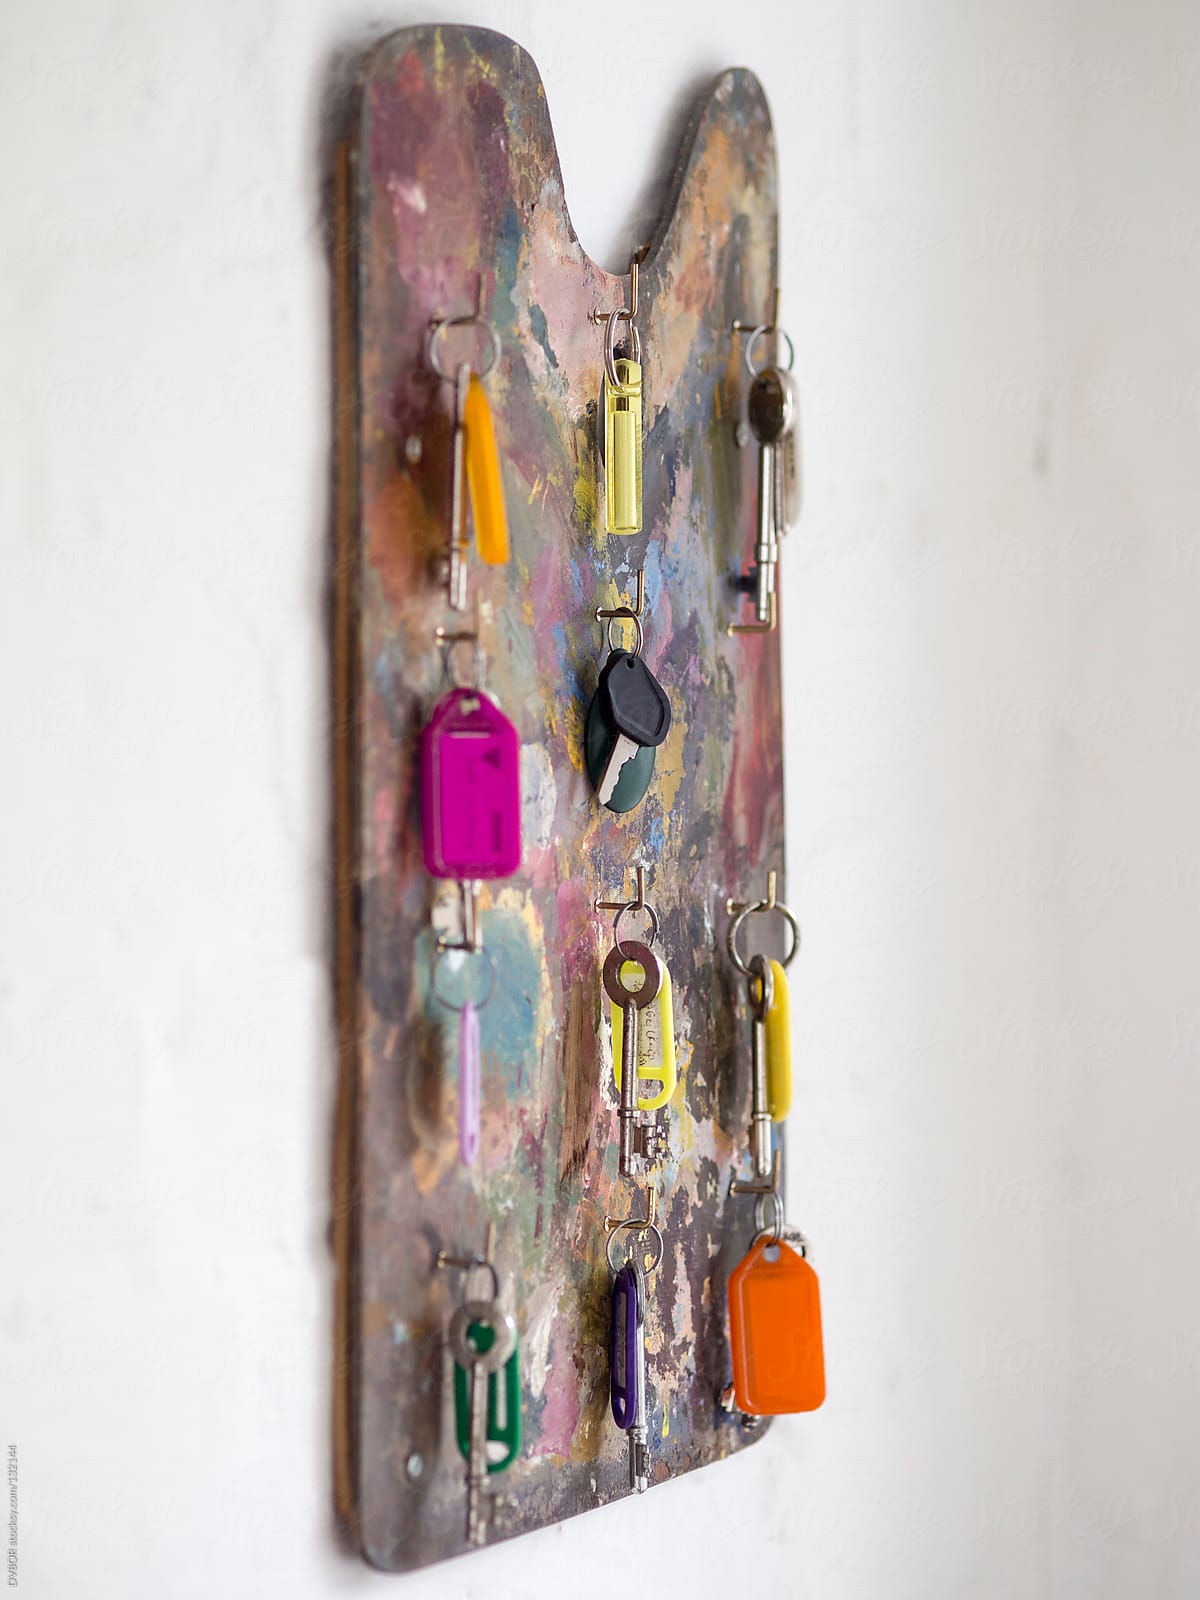 Key Holder made from an artists paint pallet